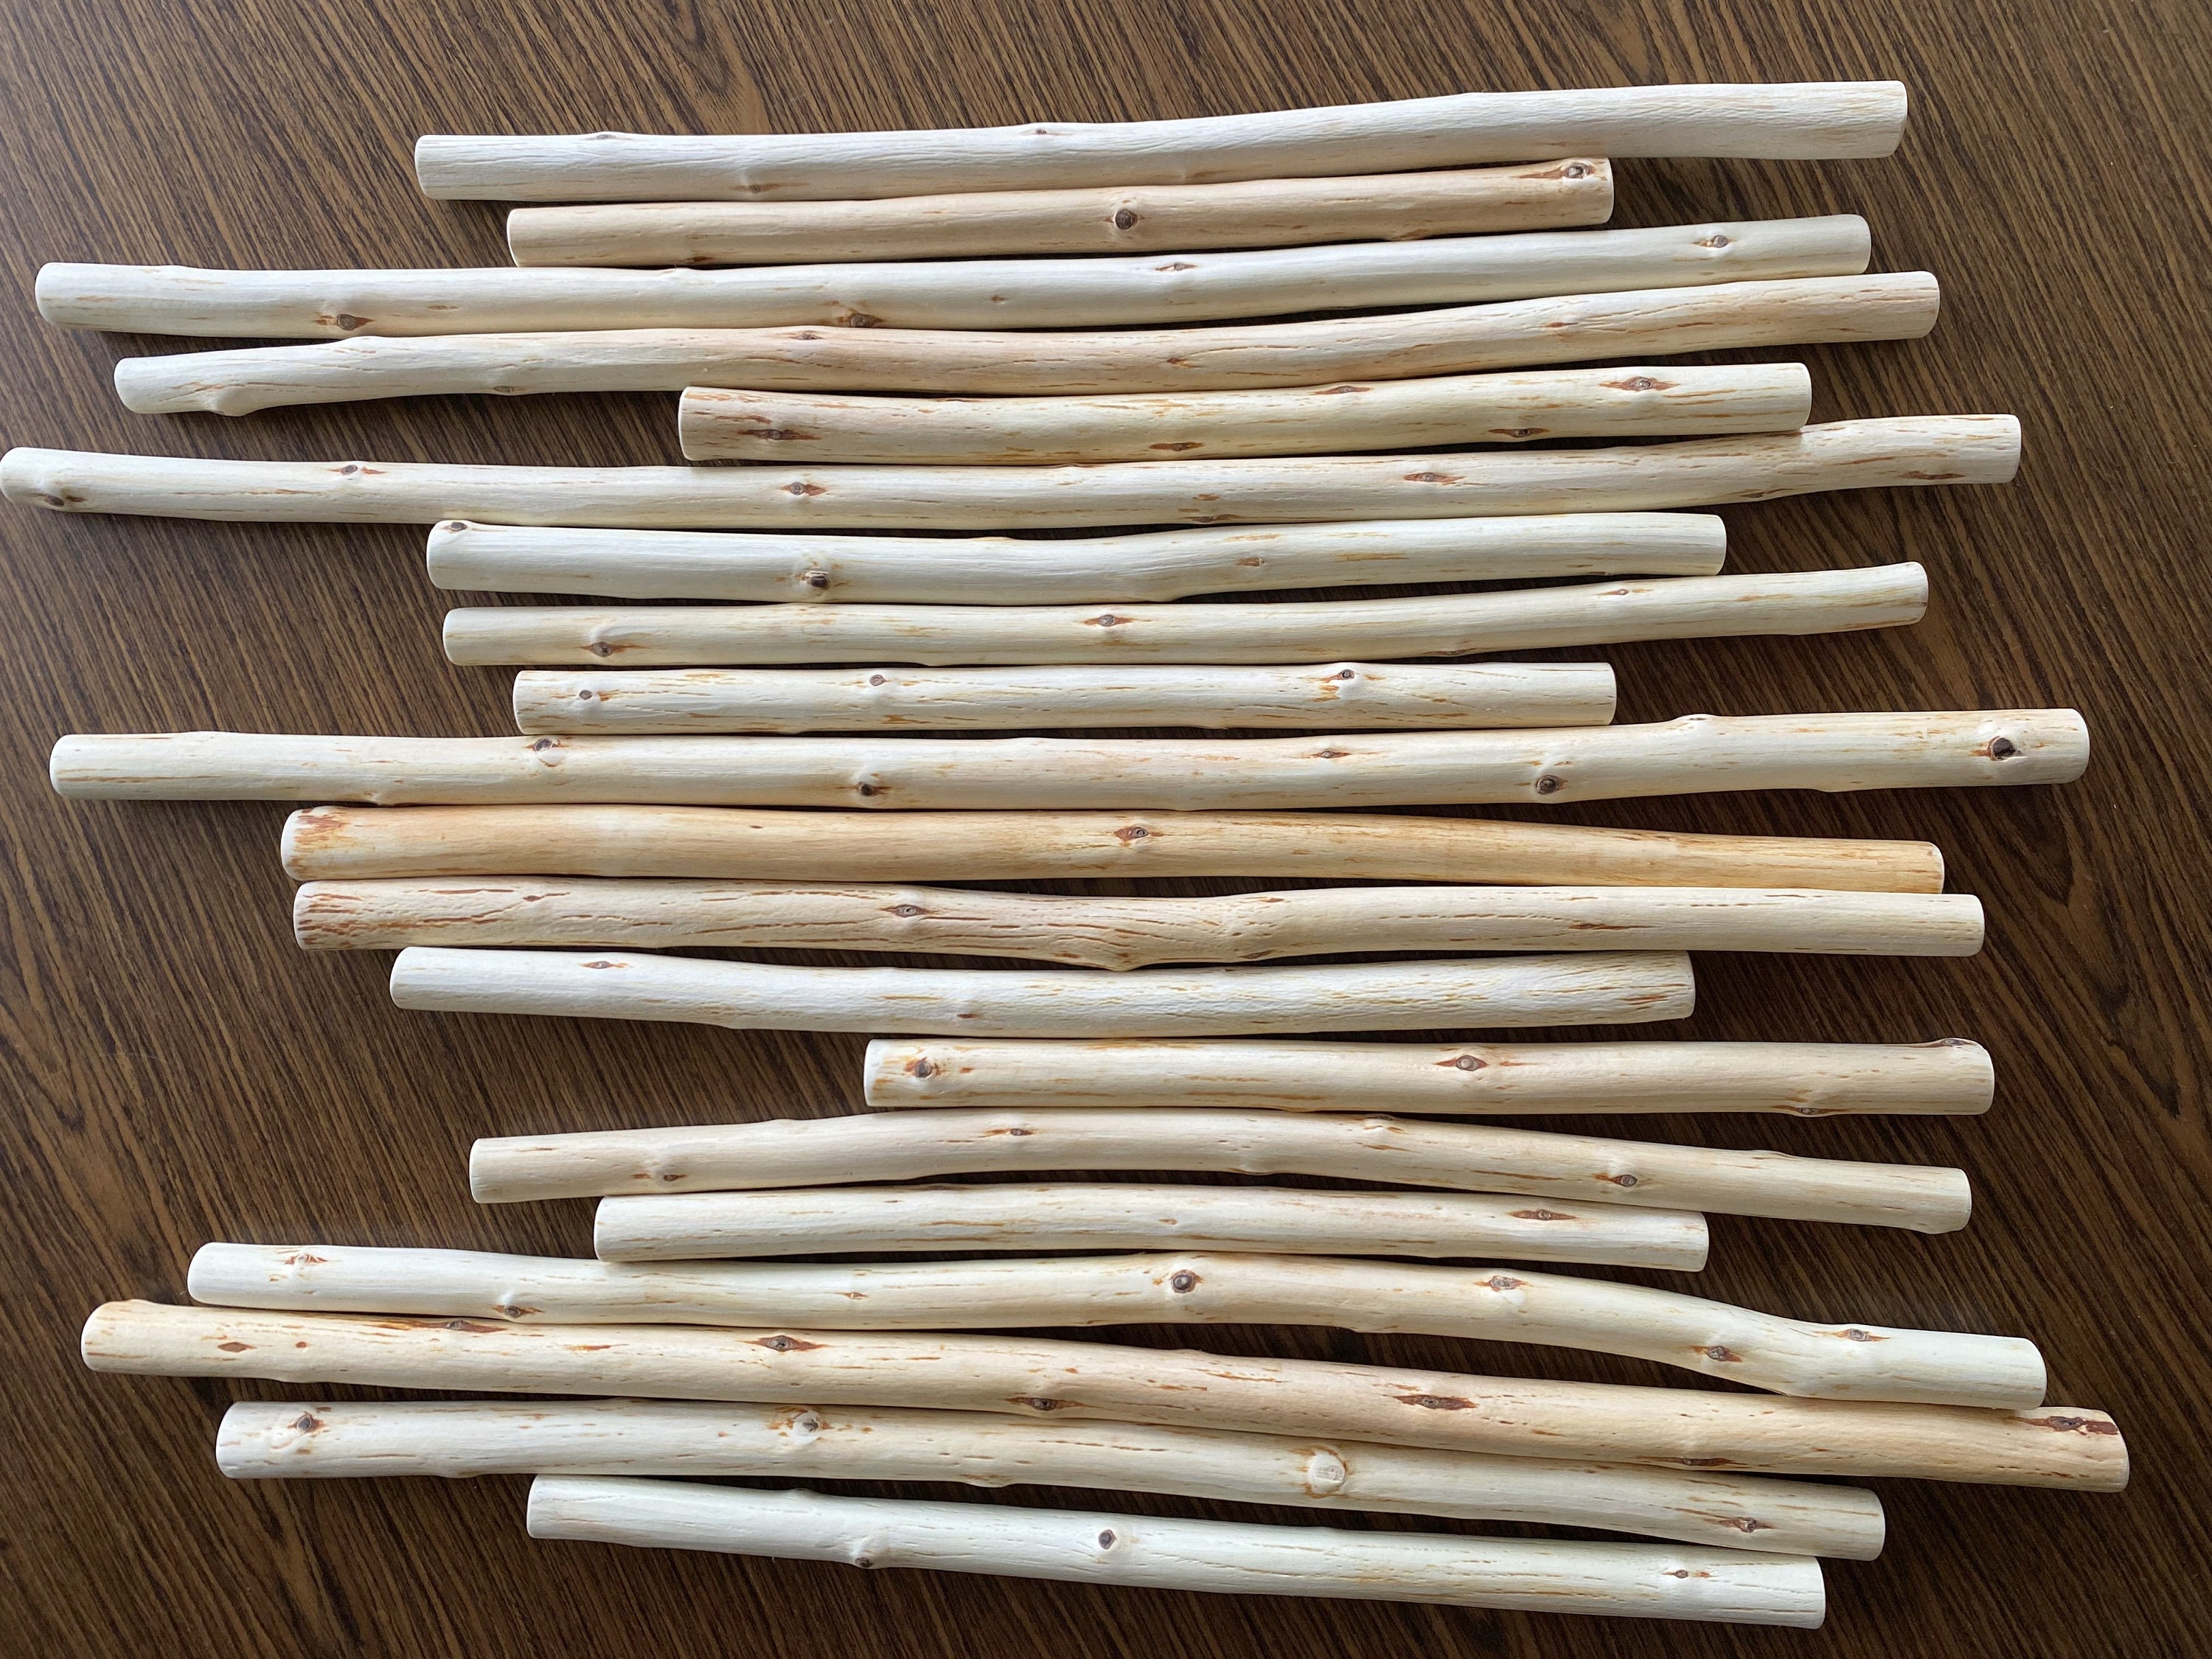  Perfect Stix 6 inch Bamboo Wooden Dowels. Pack of 60 Count.  Thickness is 1/4. Great for Crafts and Schools. : Arts, Crafts & Sewing